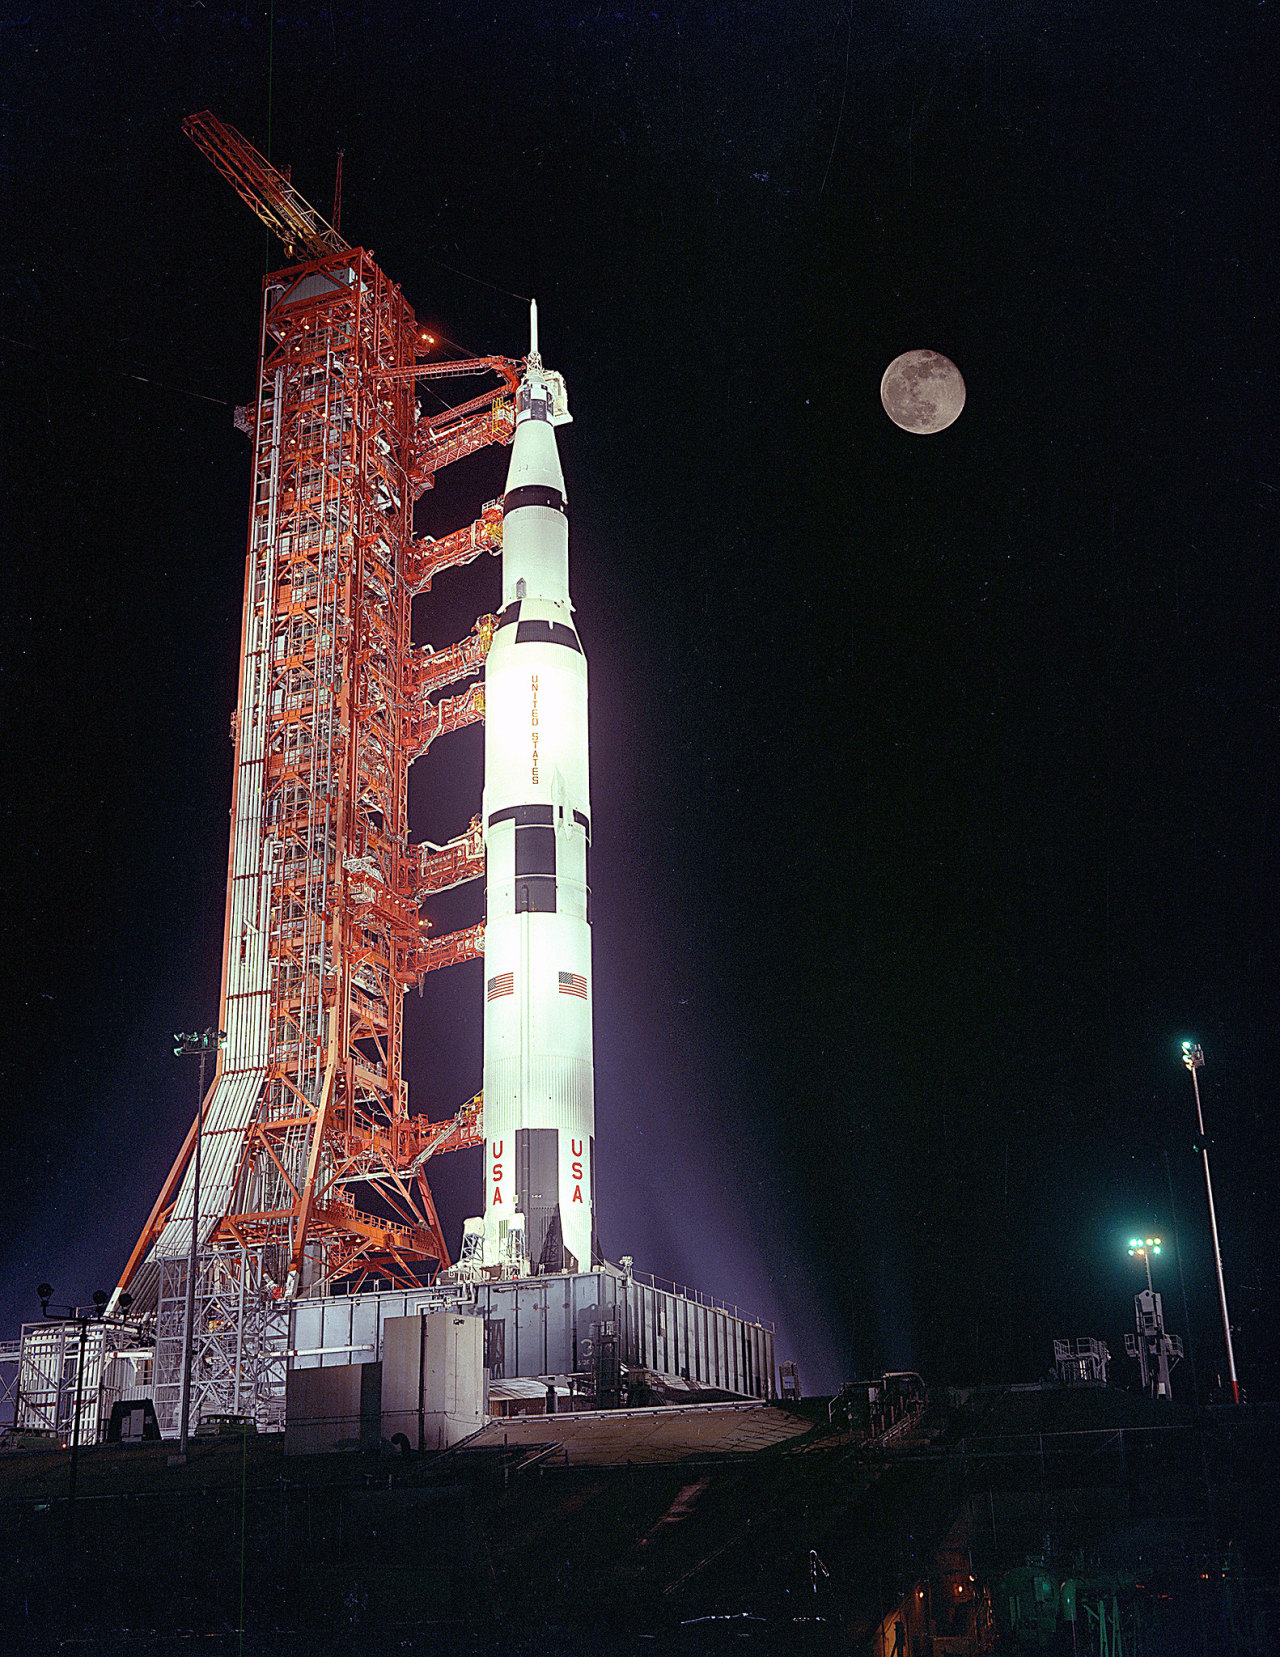 The Apollo 17 Space Vehicle sits poised beneath a full moon on Launch Pad 39A at the Kennedy Space Center during the launch countdown. The Saturn V rocket is mostly white, with several black patches, American flags, and the letters “USA” on its side. It is connected to an orange launch tower on the left. Credit: NASA